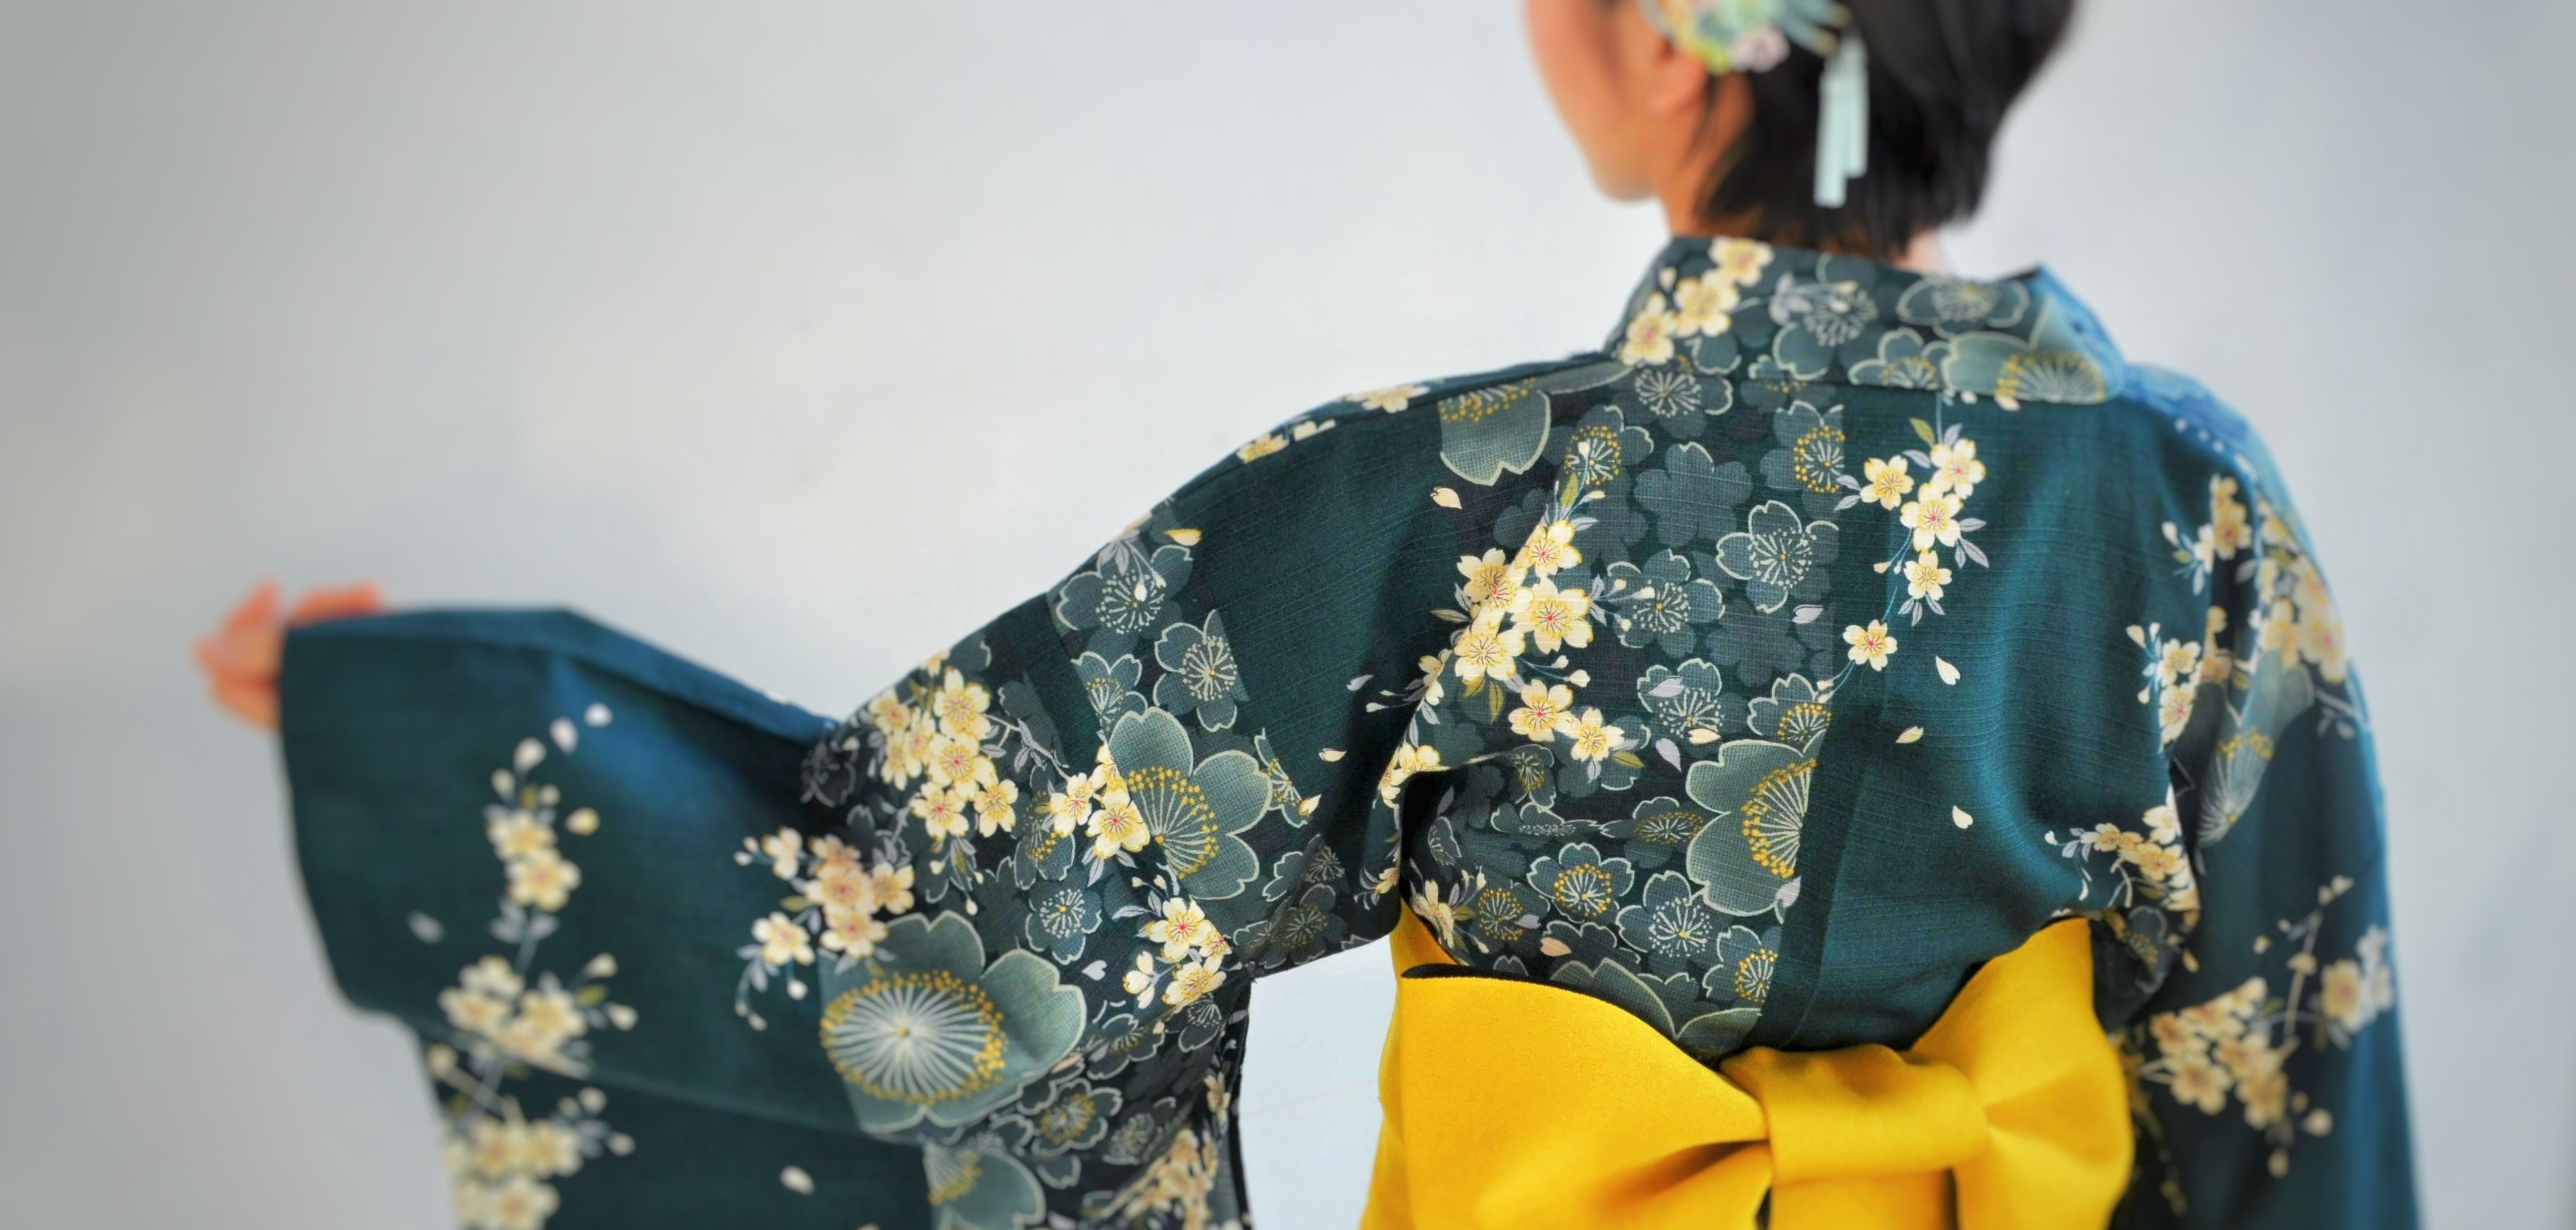 Yukata is a traditional Japanese relaxing garment. These traditionally designed garments are used as loungewear in Japanese inns and as hot summer attire.